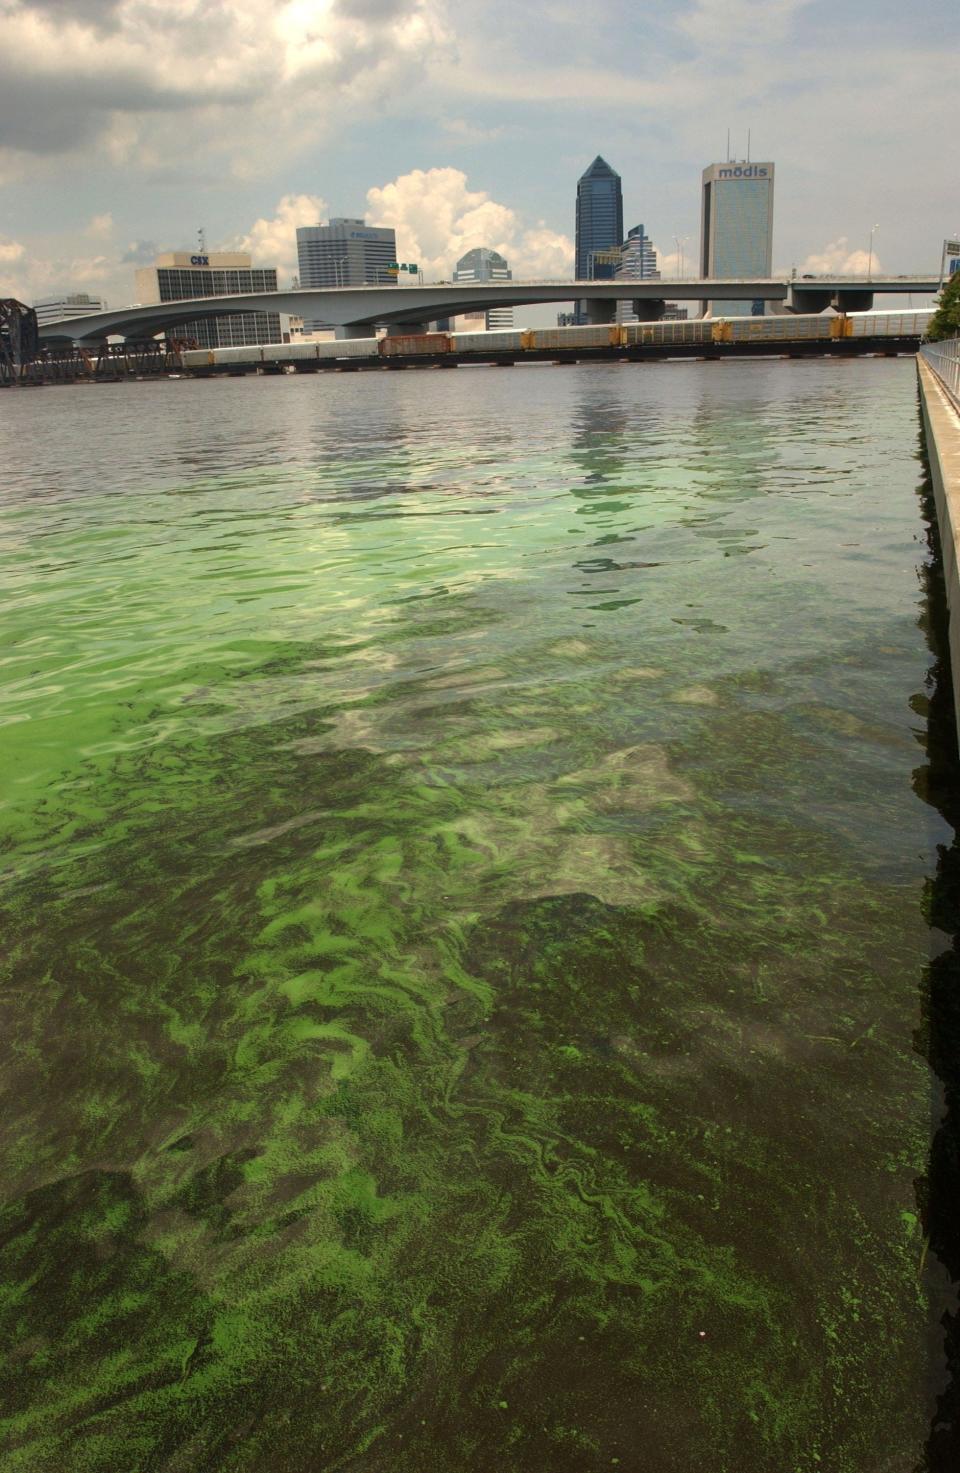 Algae covers the St. Johns River in this 2005 photo of downtown Jacksonville.